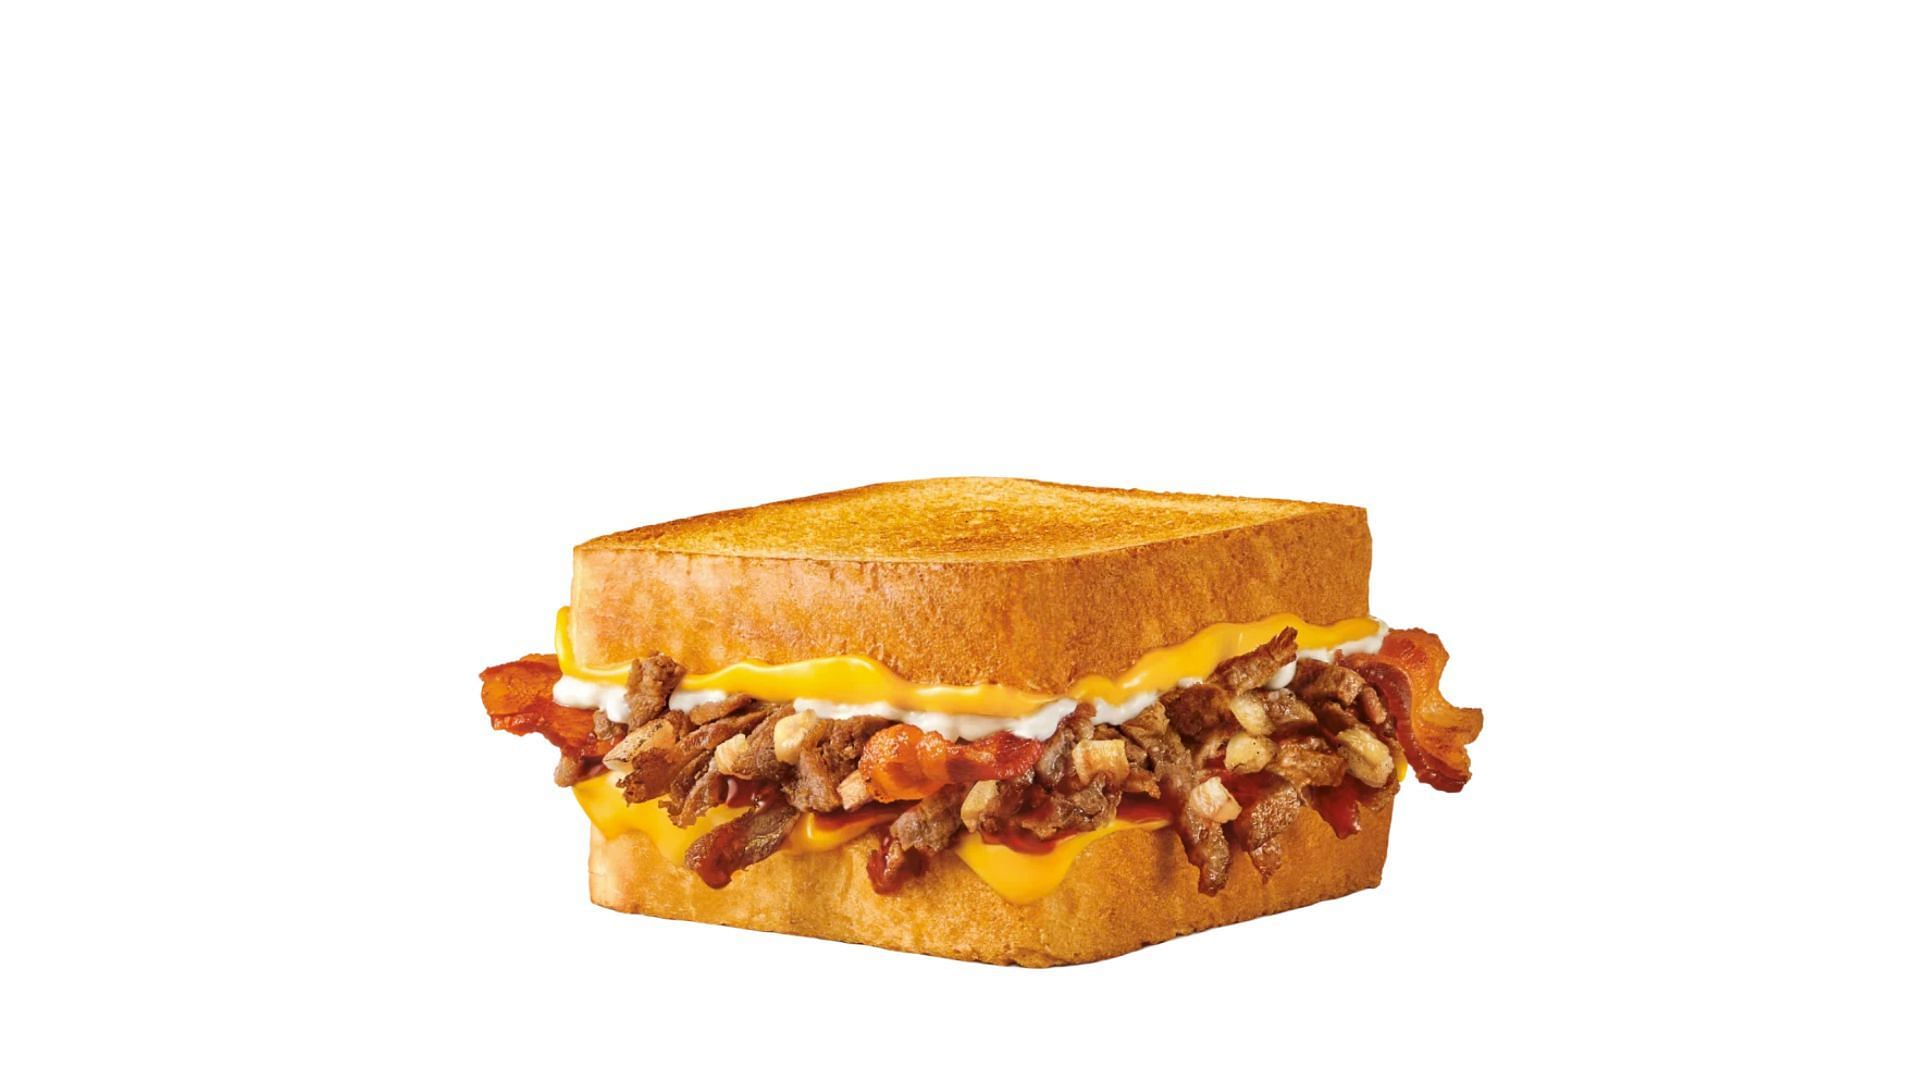 Steak and Bacon Grilled Cheese Sandwich - Classic (Image via Sonic)